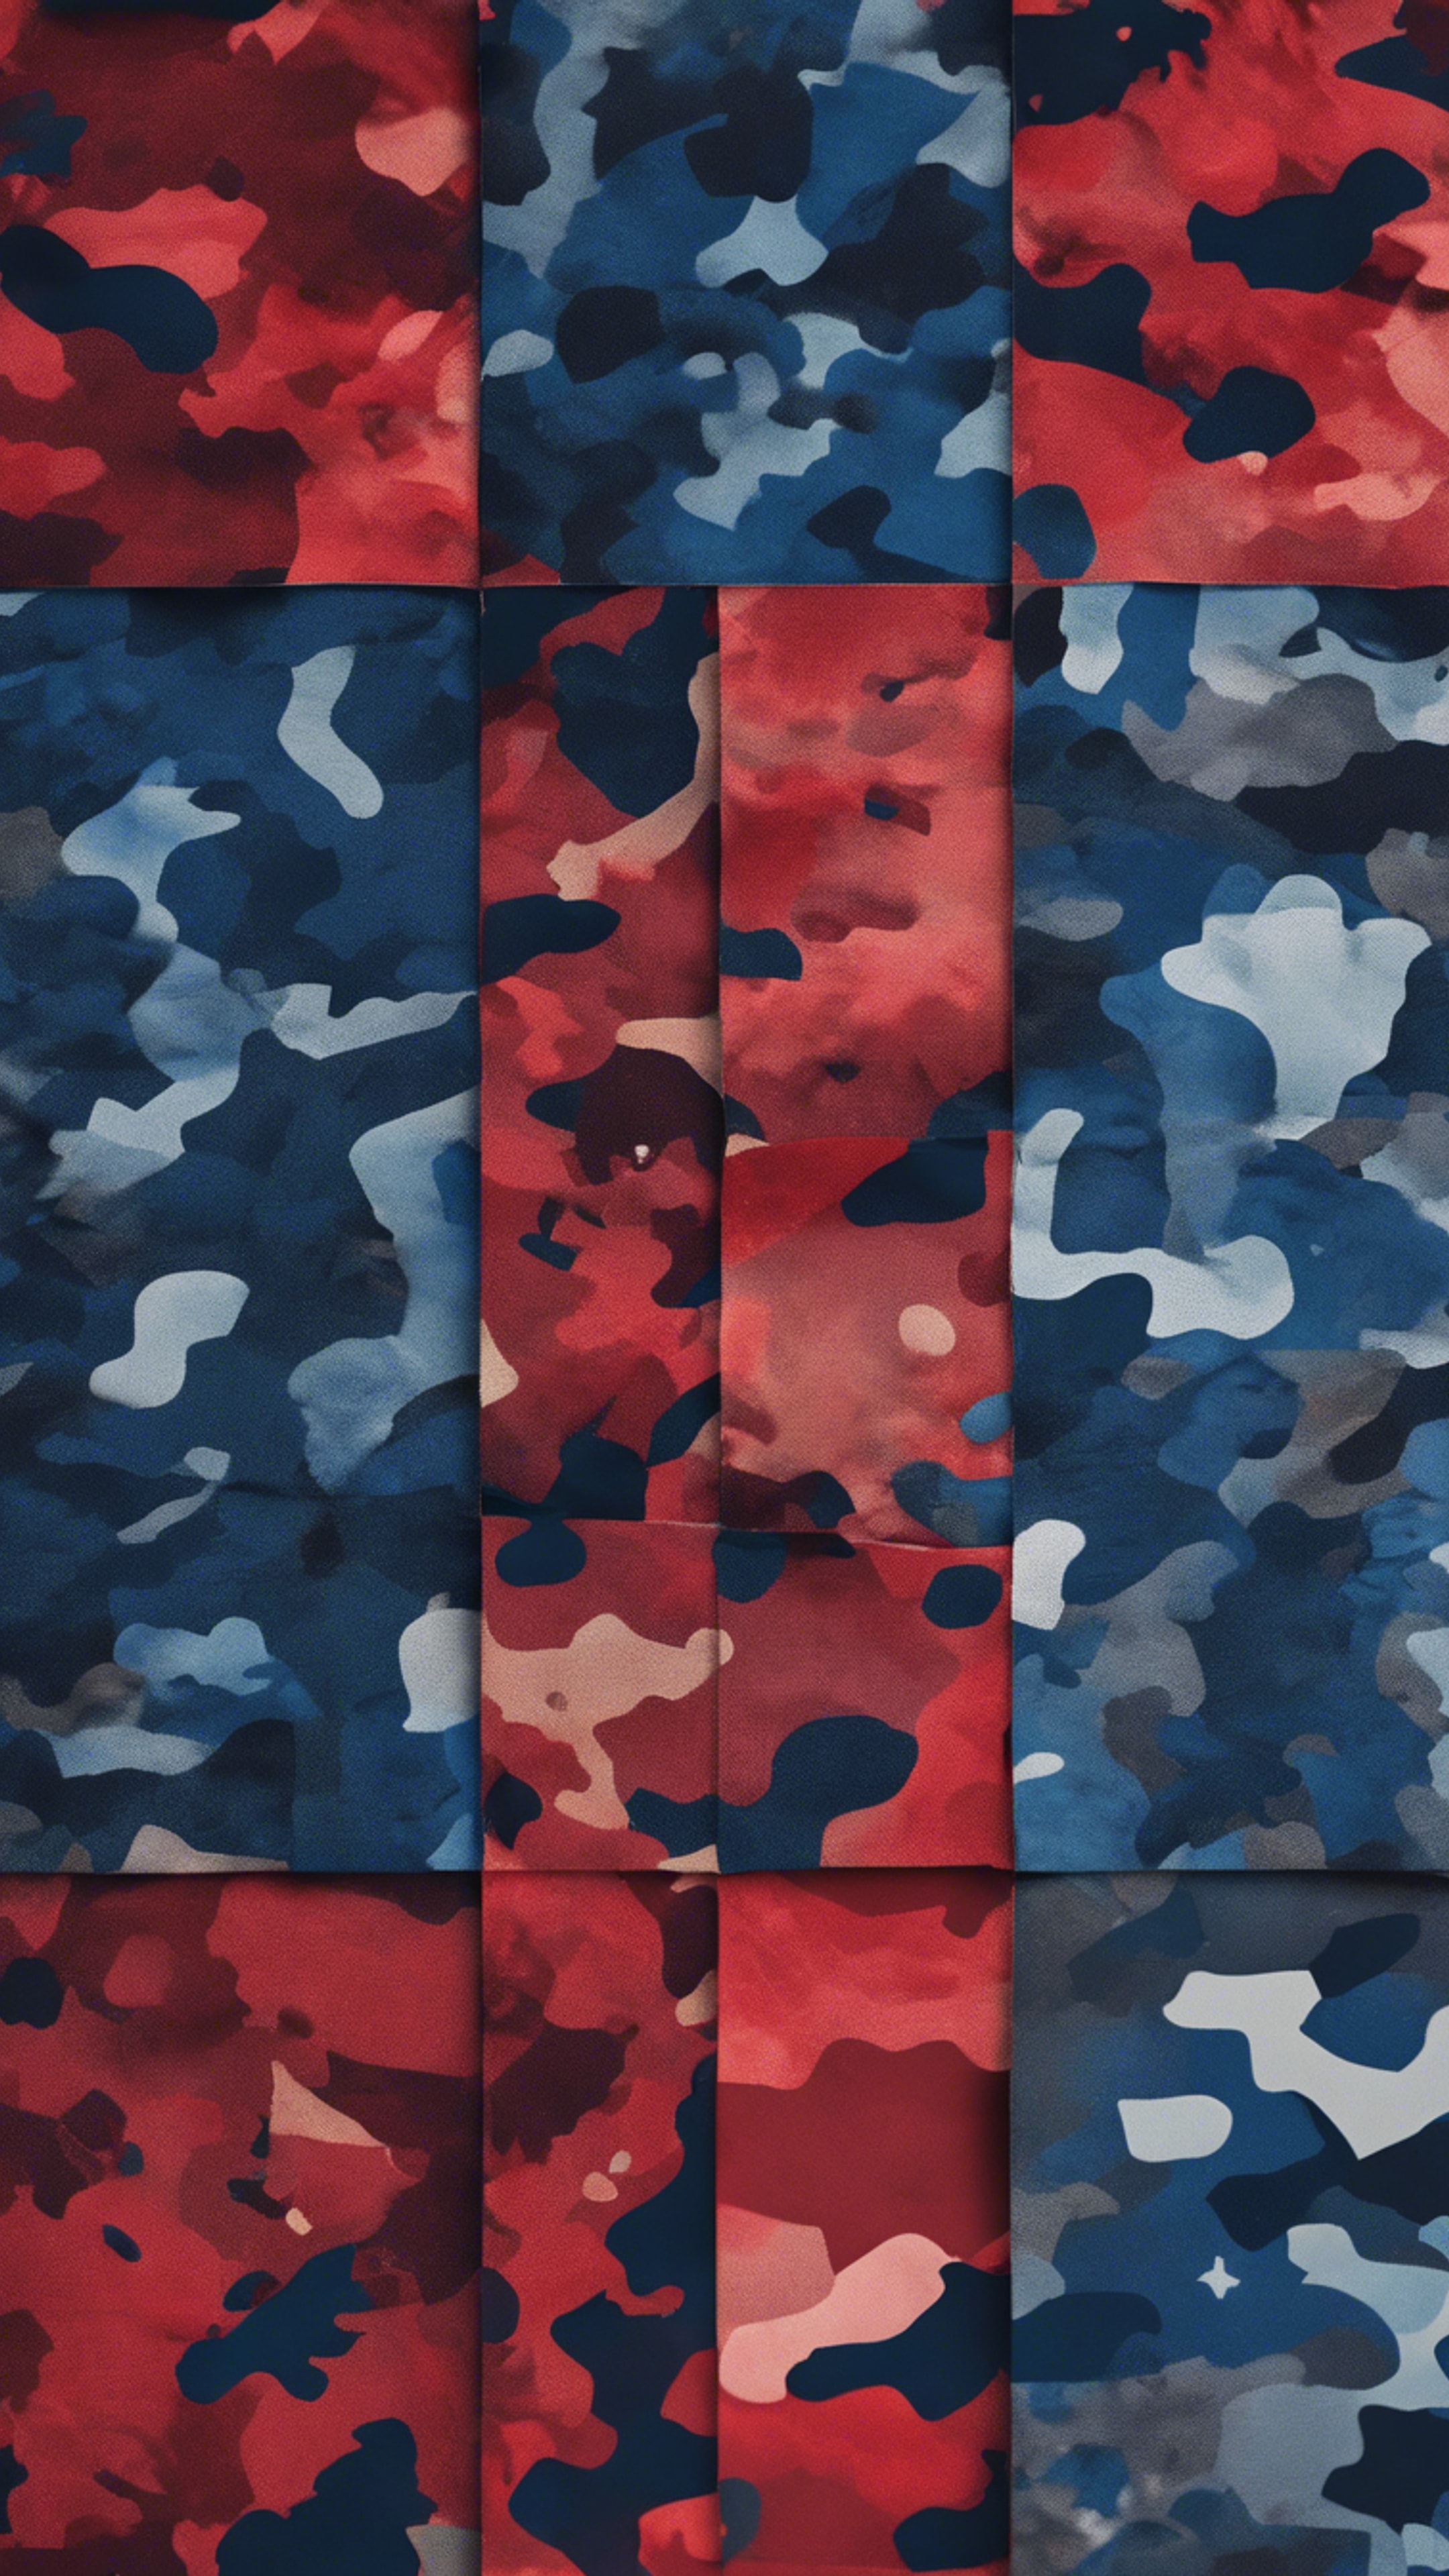 Wide patches of red and blue in a modernized camouflage pattern. 벽지[bf2d18a8e46c447ea6e3]